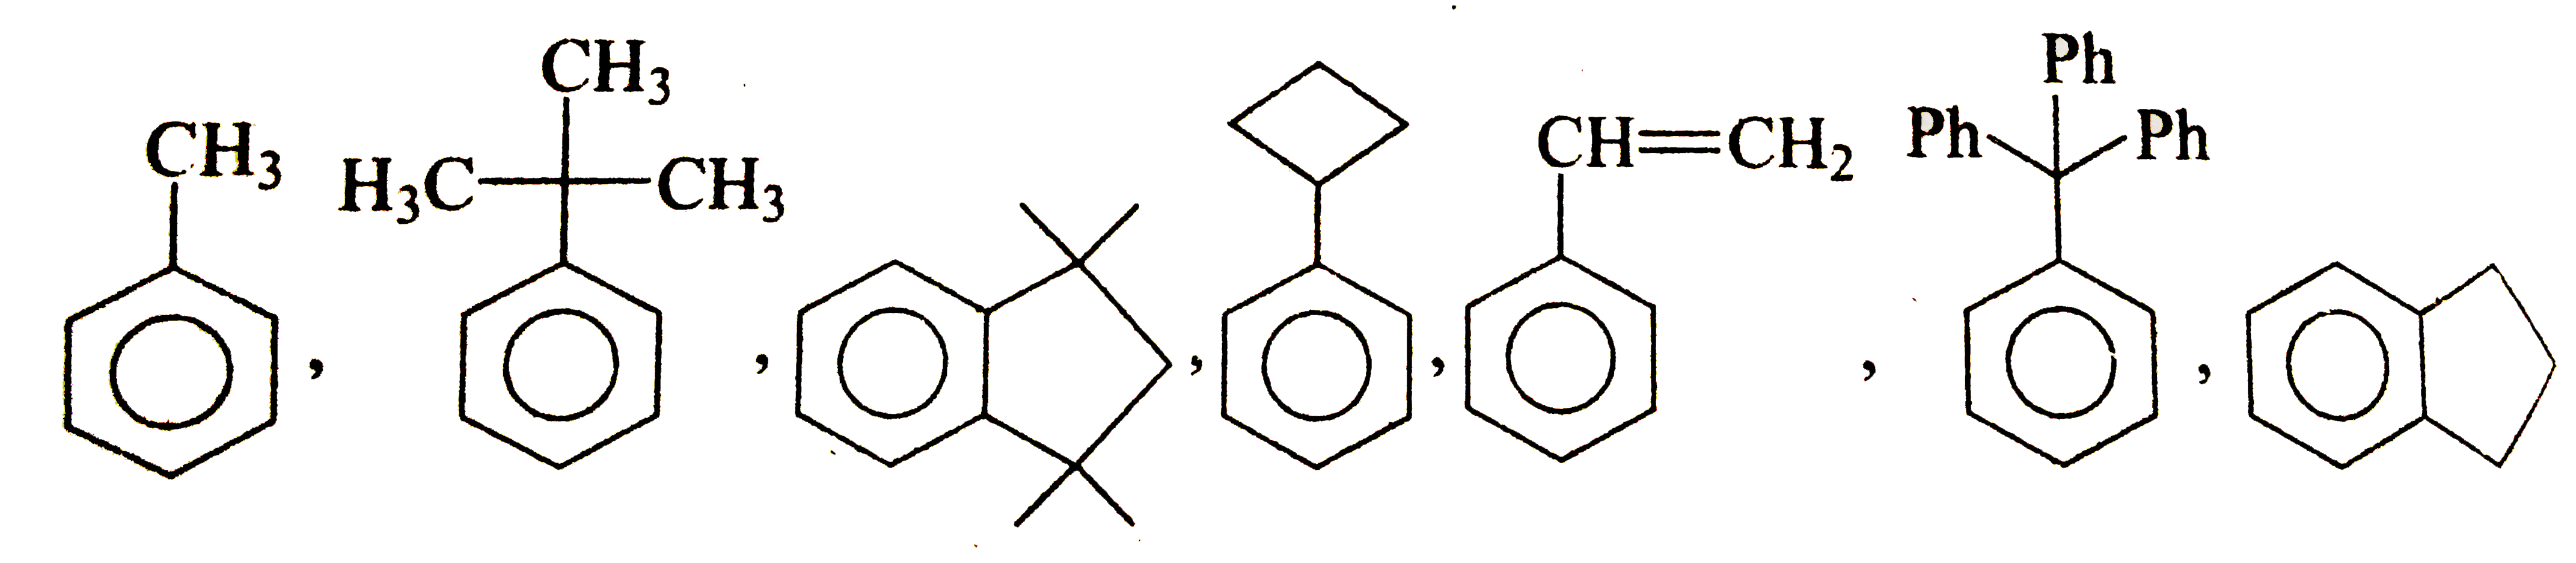 Eaxmine  the structural formula shown below and find out  how many compounds  will show oxidation  reaction with acidic KMnO(4)